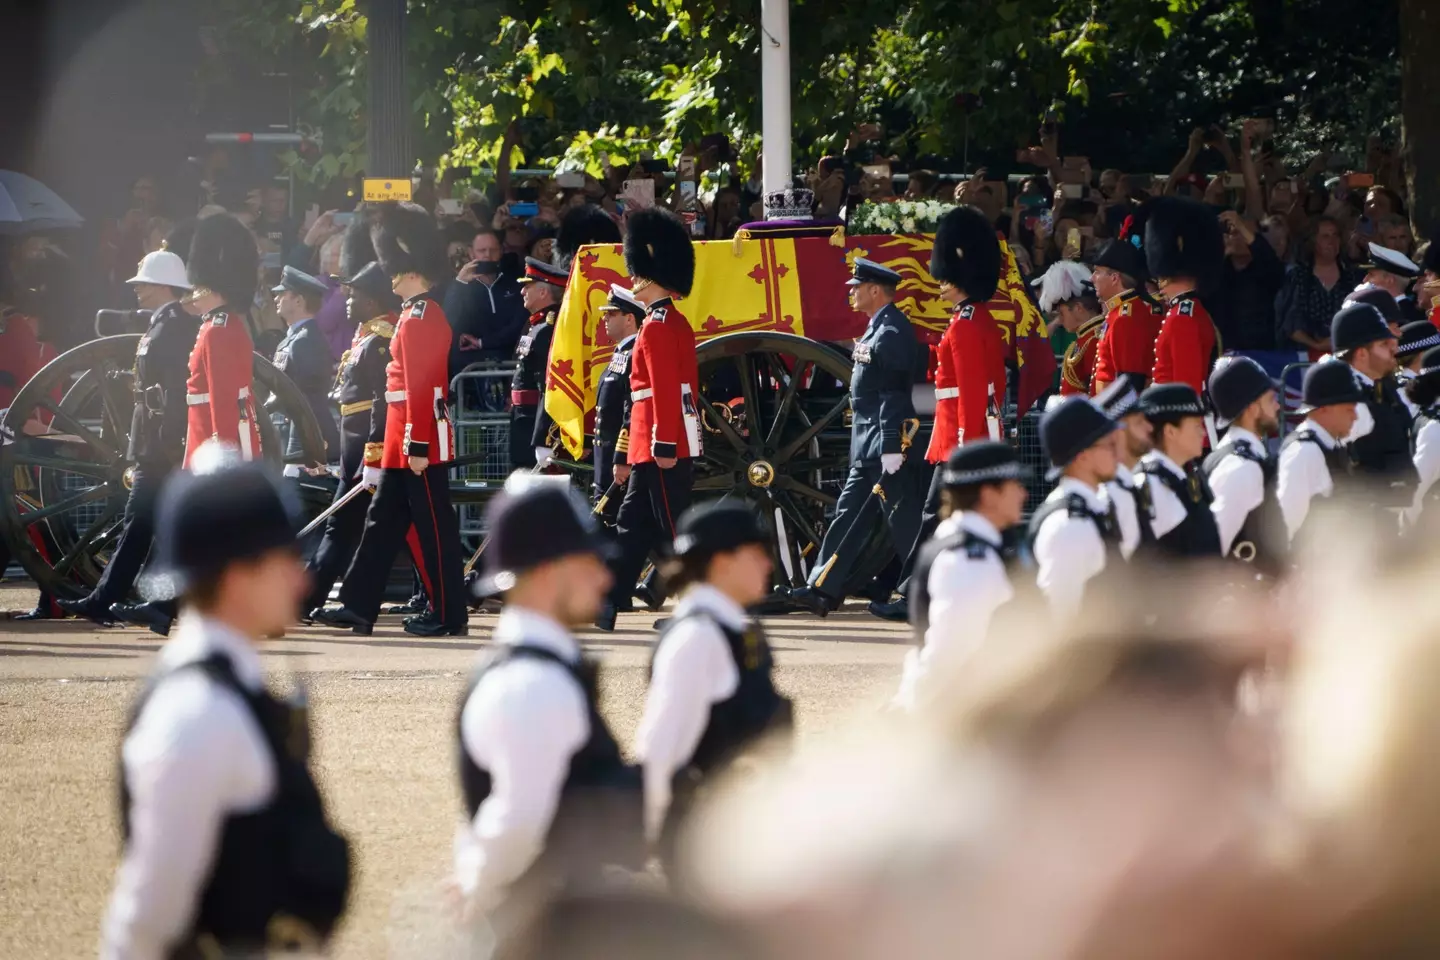 The Queen's coffin being transported from Buckingham Palace to Westminster Hall.